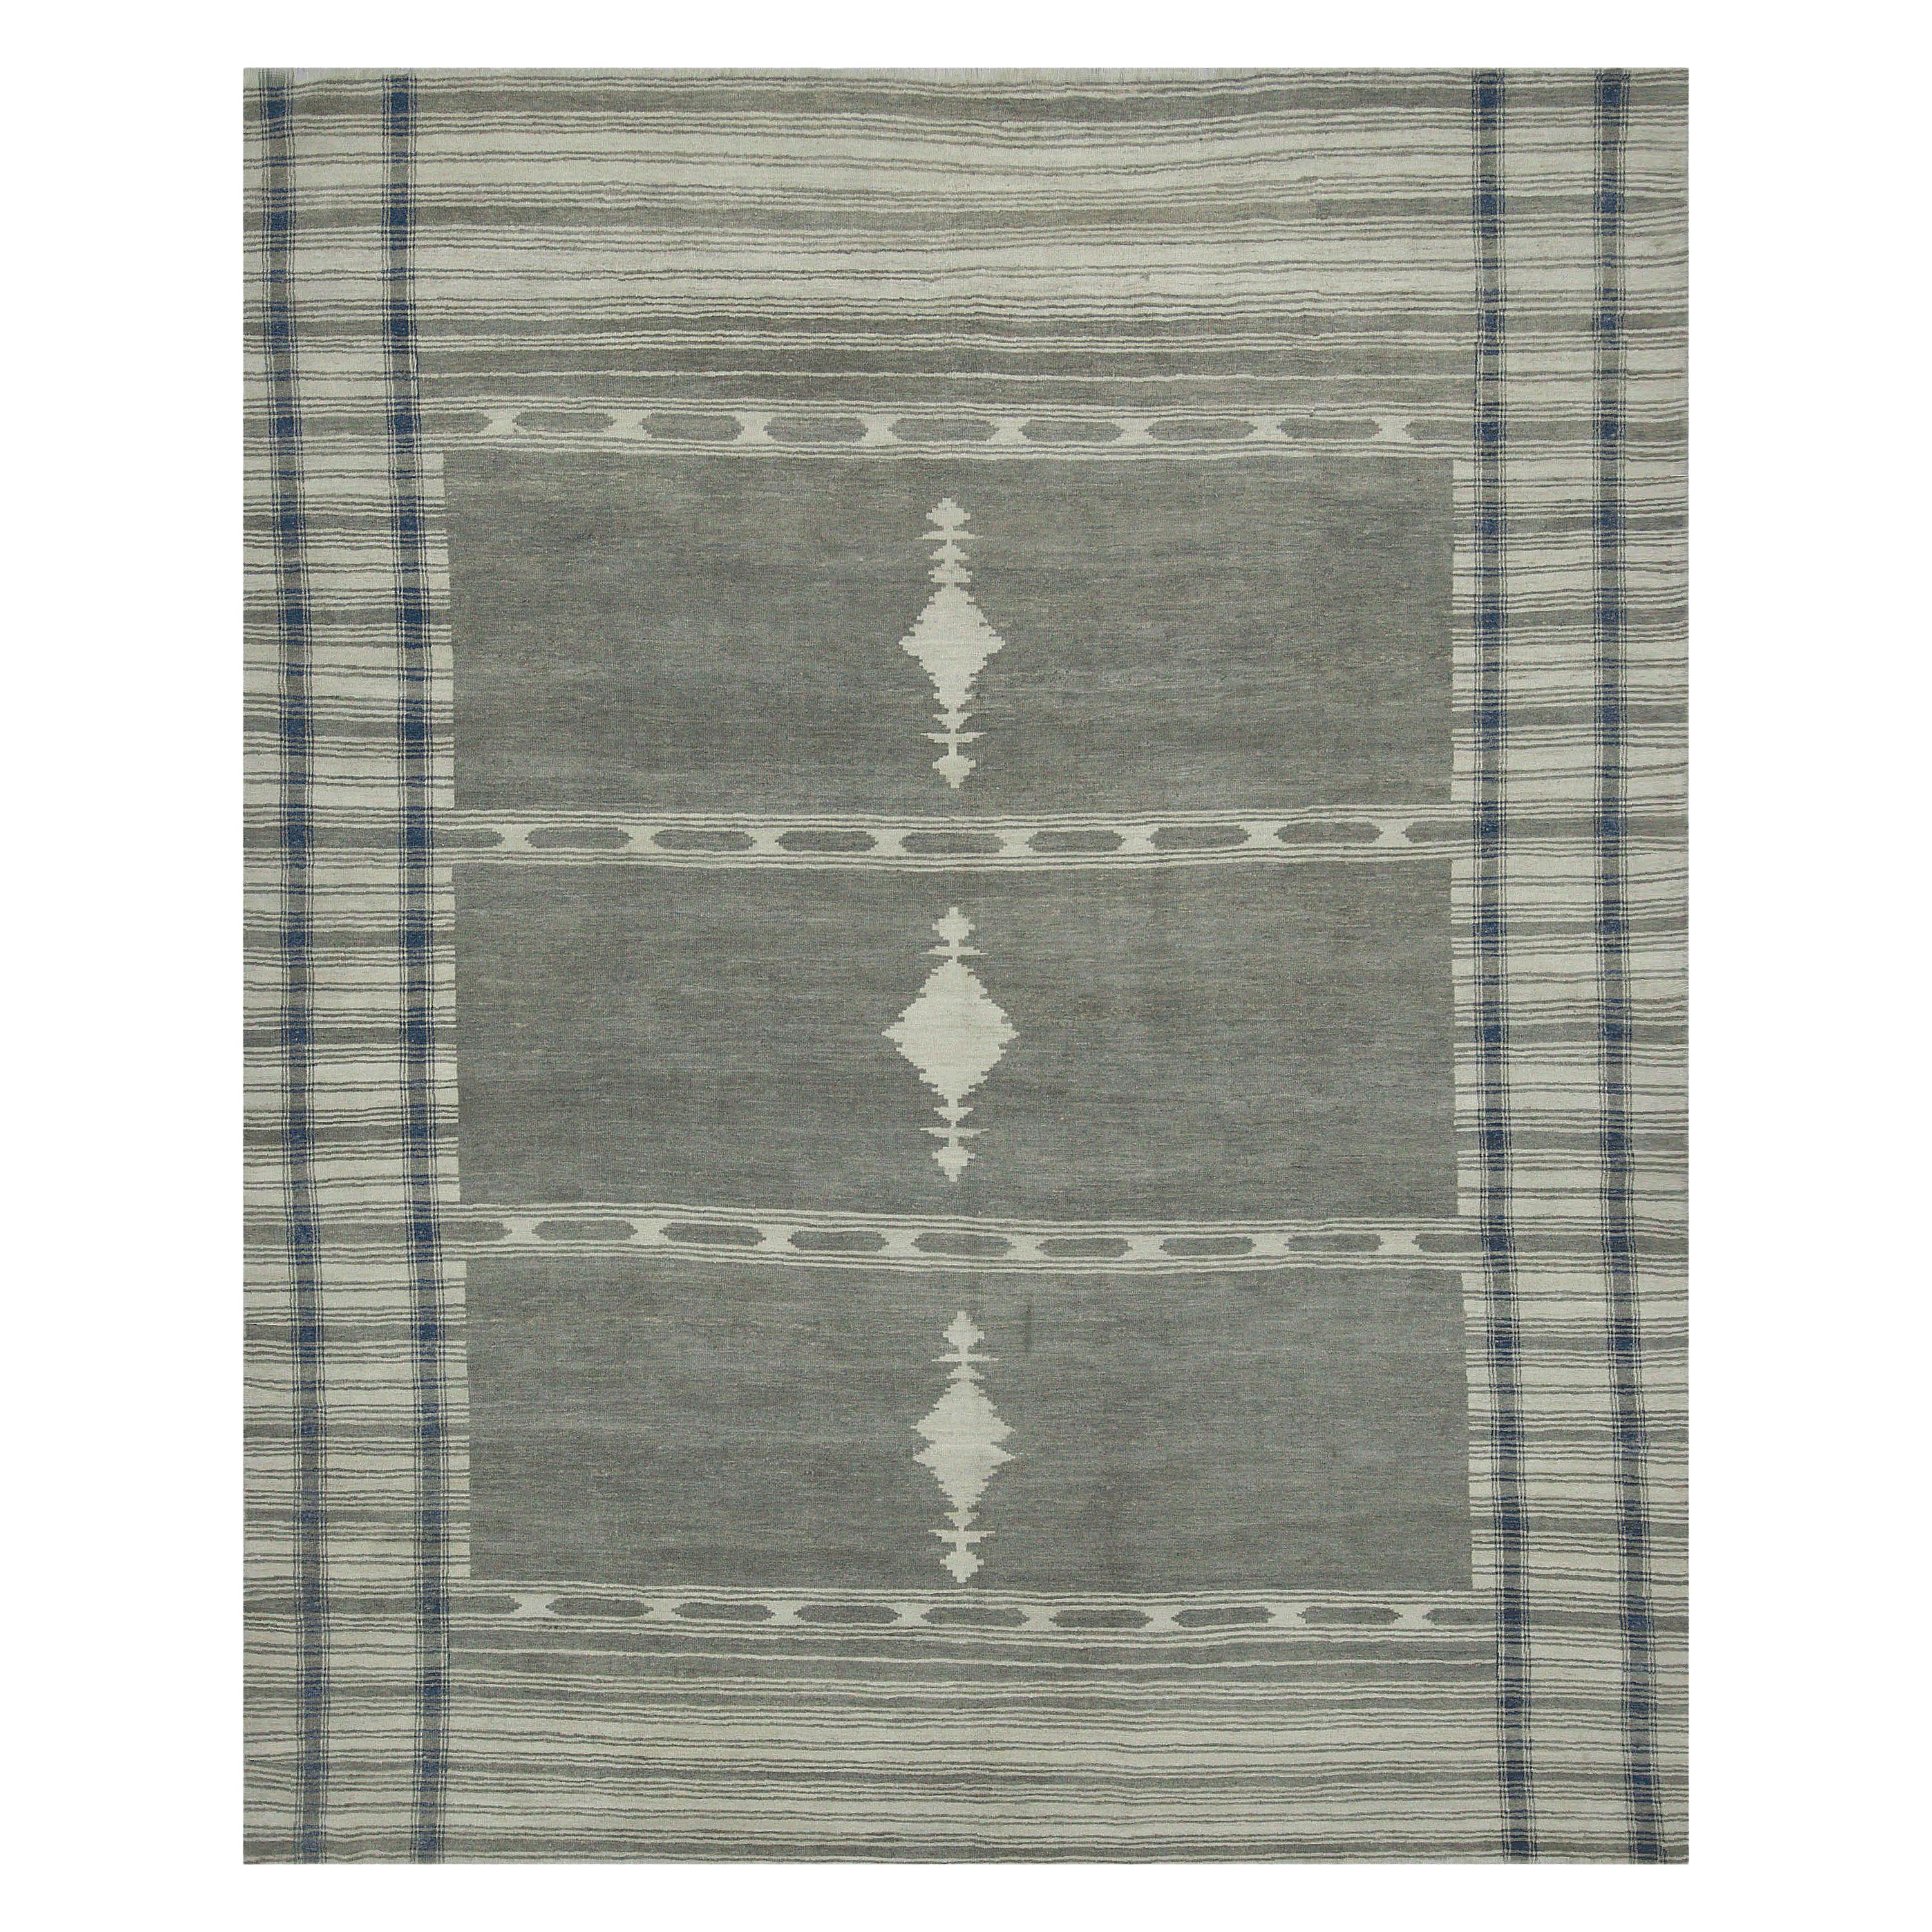 Modern Oushak Rug with Striped Ivory Gray Field and Geometric Patterns